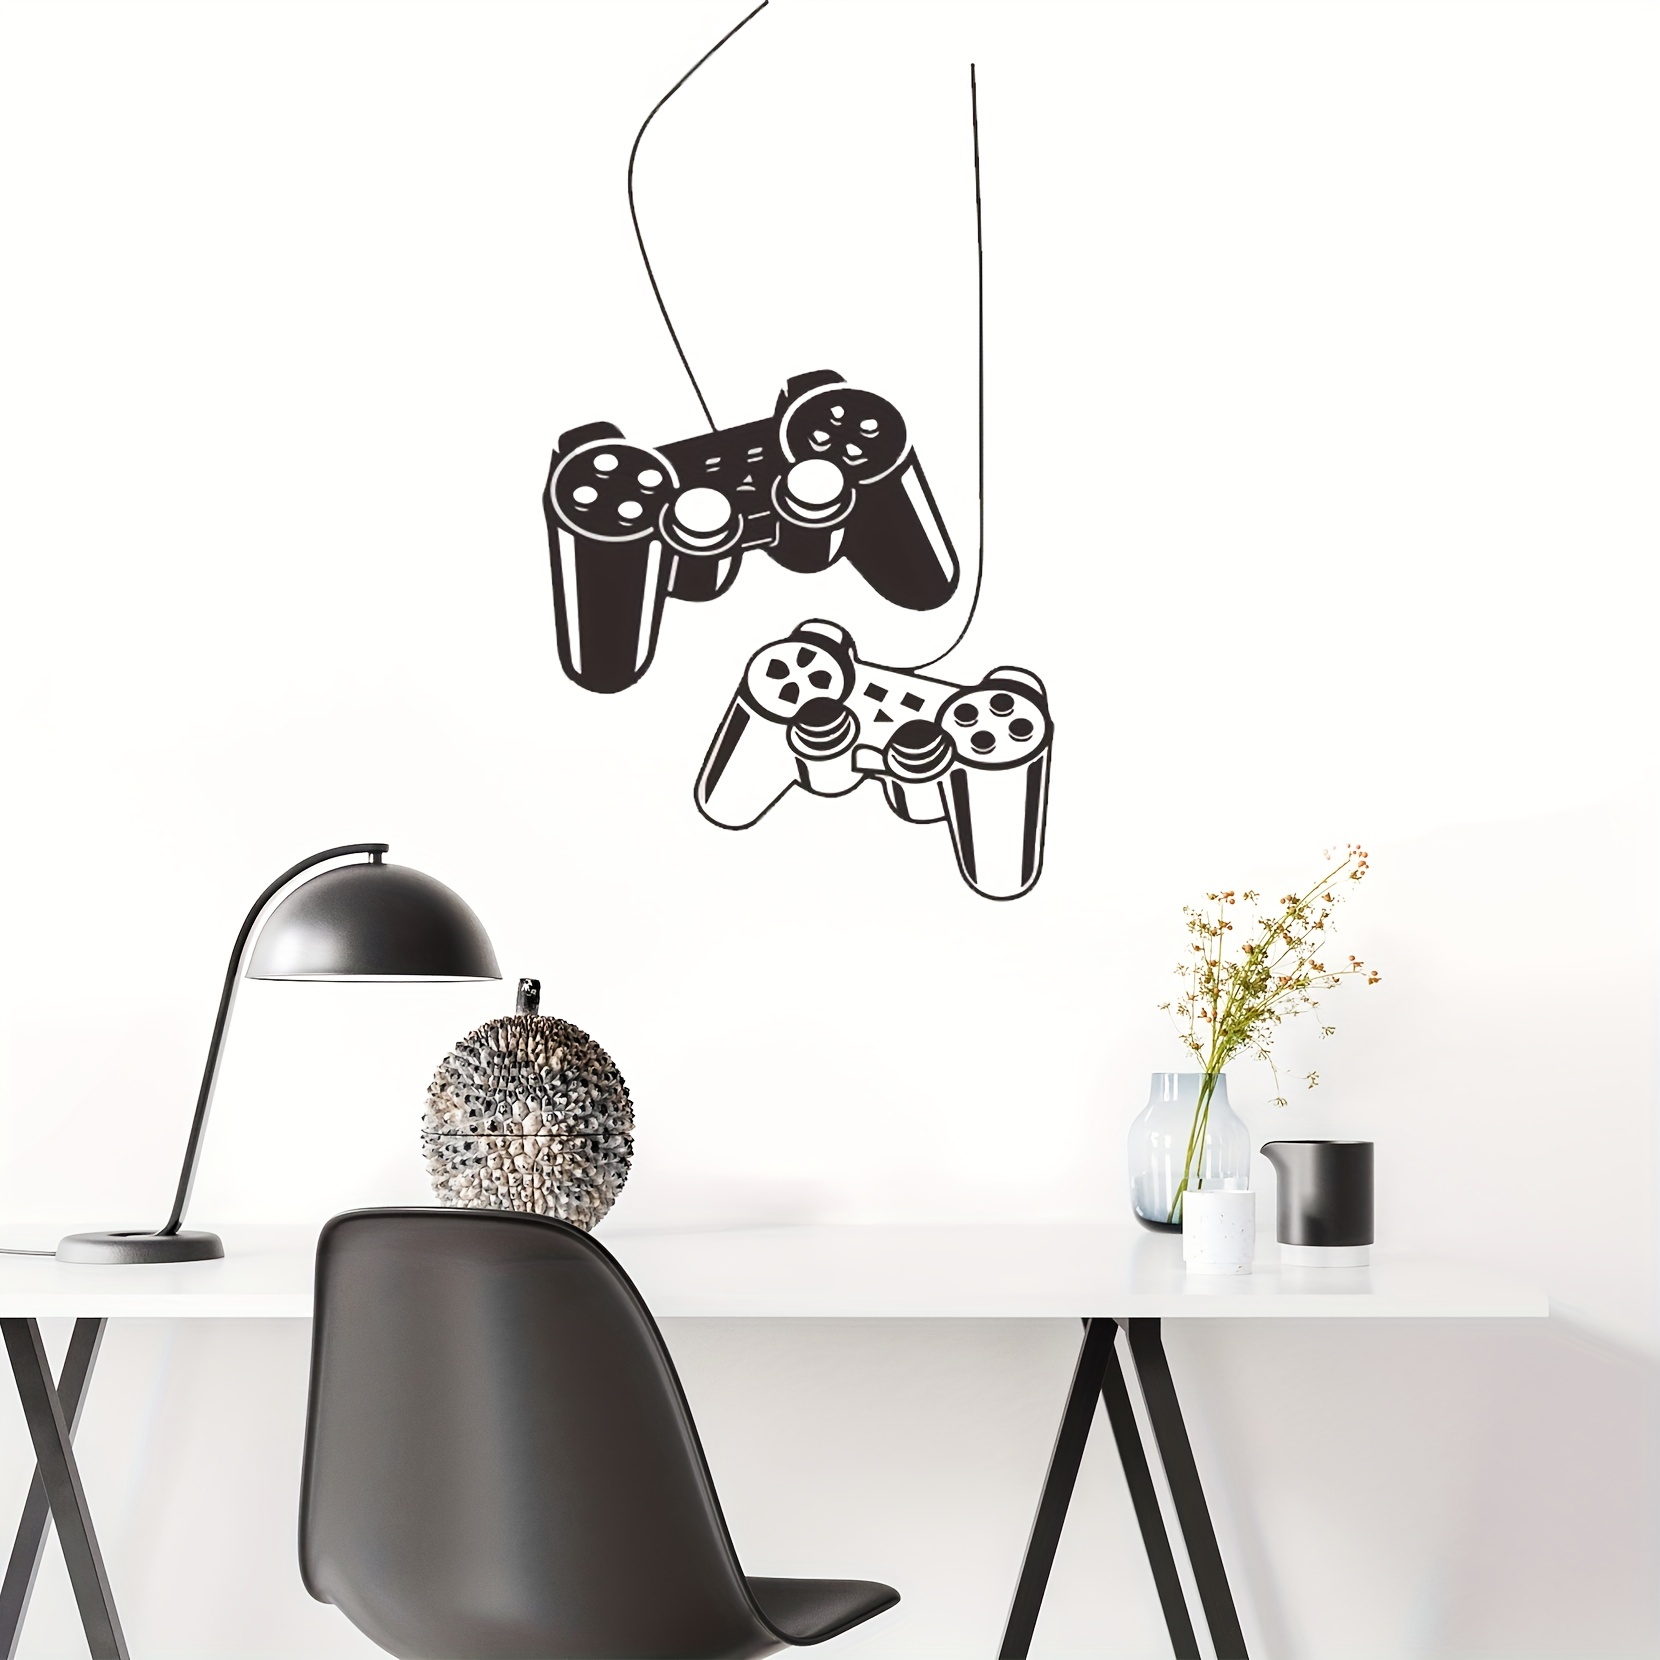 New Gamer Wall Sticker For Game Room Decor Kids Room Decoration Bedroom  Decor Door Vinyl Stickers Mural Gaming Poster